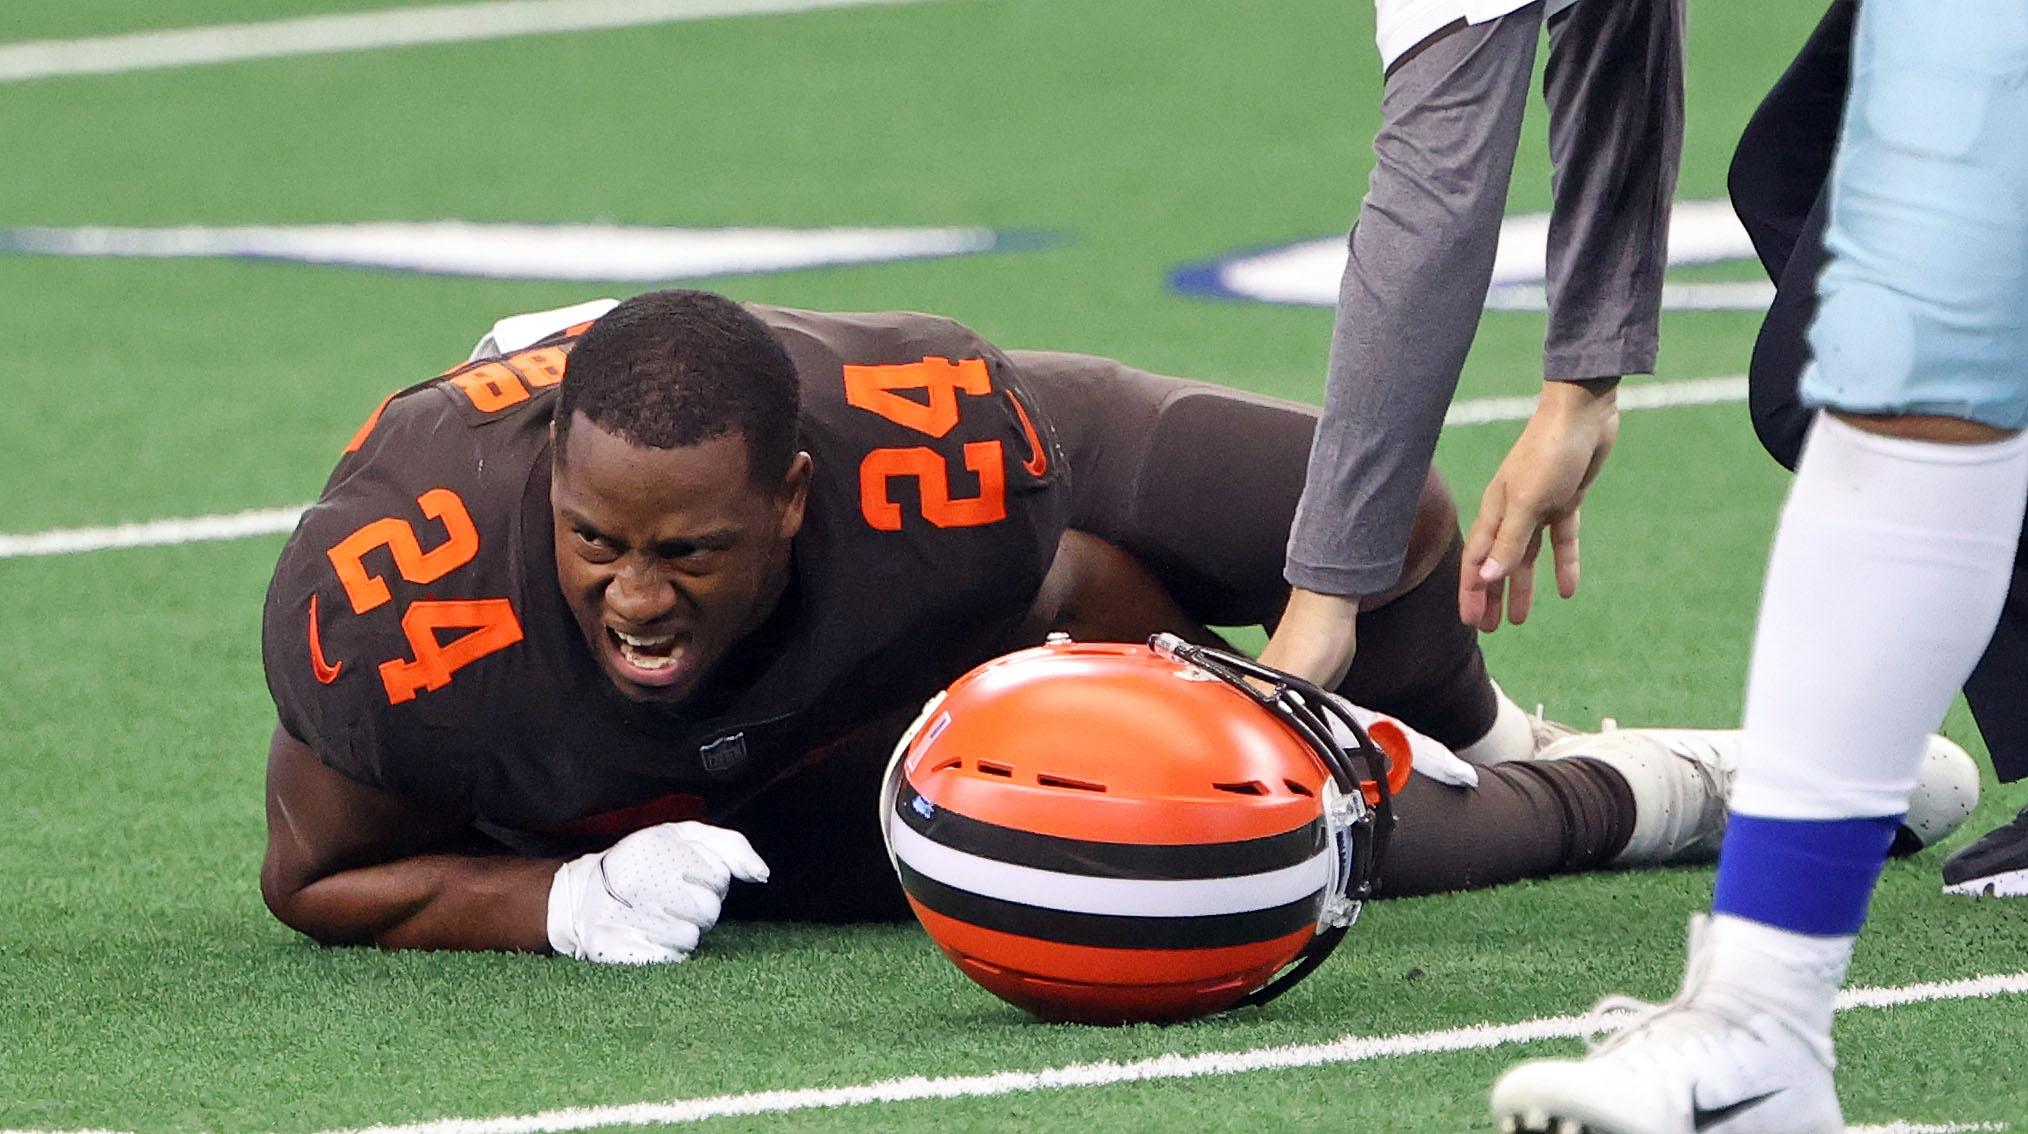 Social media reacts to Cleveland Browns Nick Chubb's knee injury